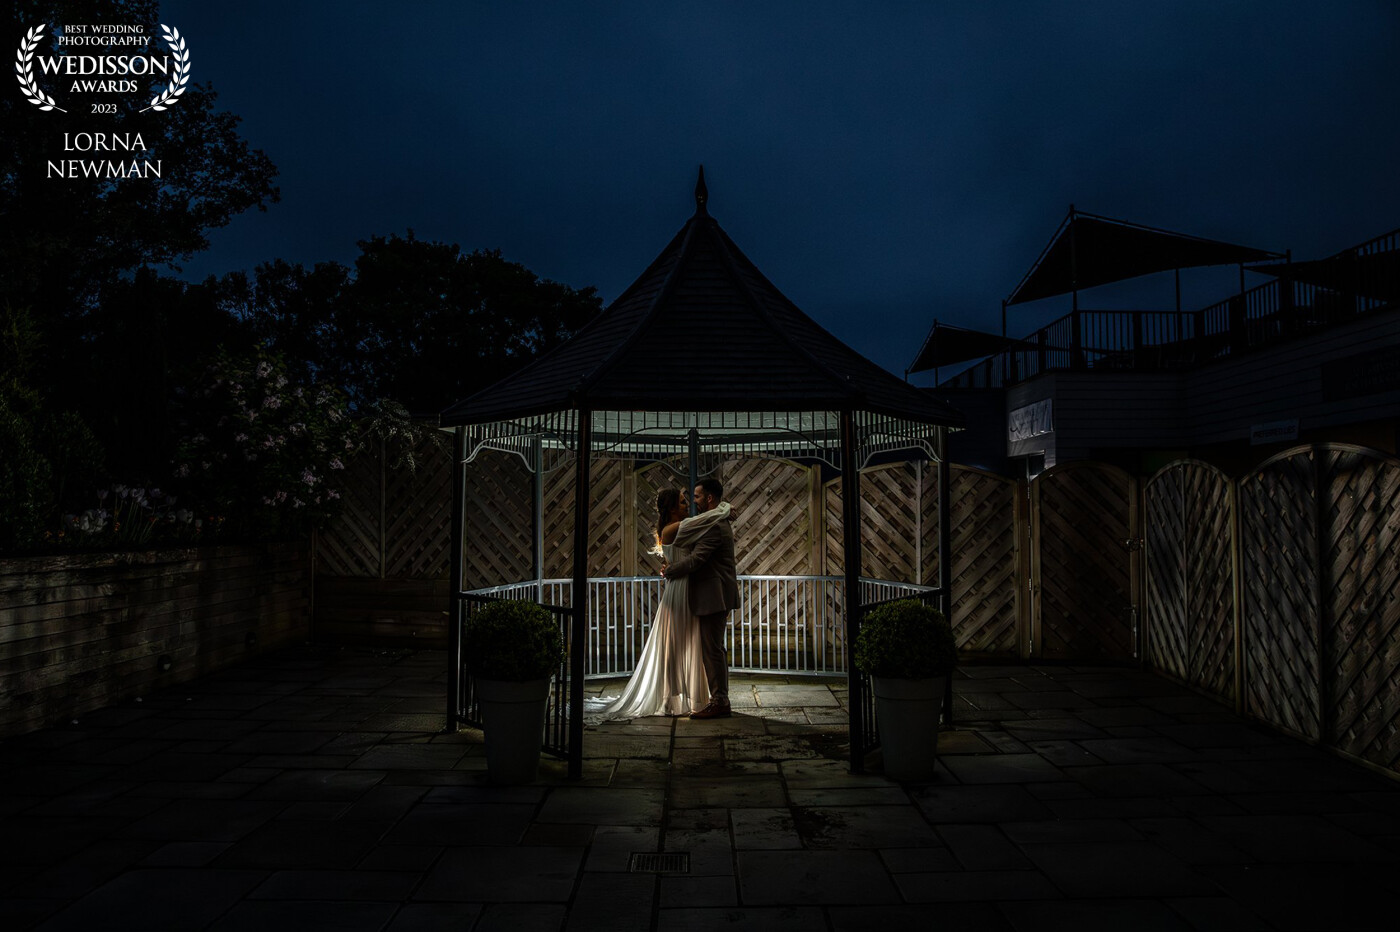 I love taking the bride and groom away at dusk time for a moment alone. This shot is of Morgan & Jack who had the most beautiful wedding, we spent a bit of time away from the wedding party to get this romantic shot of them togther.